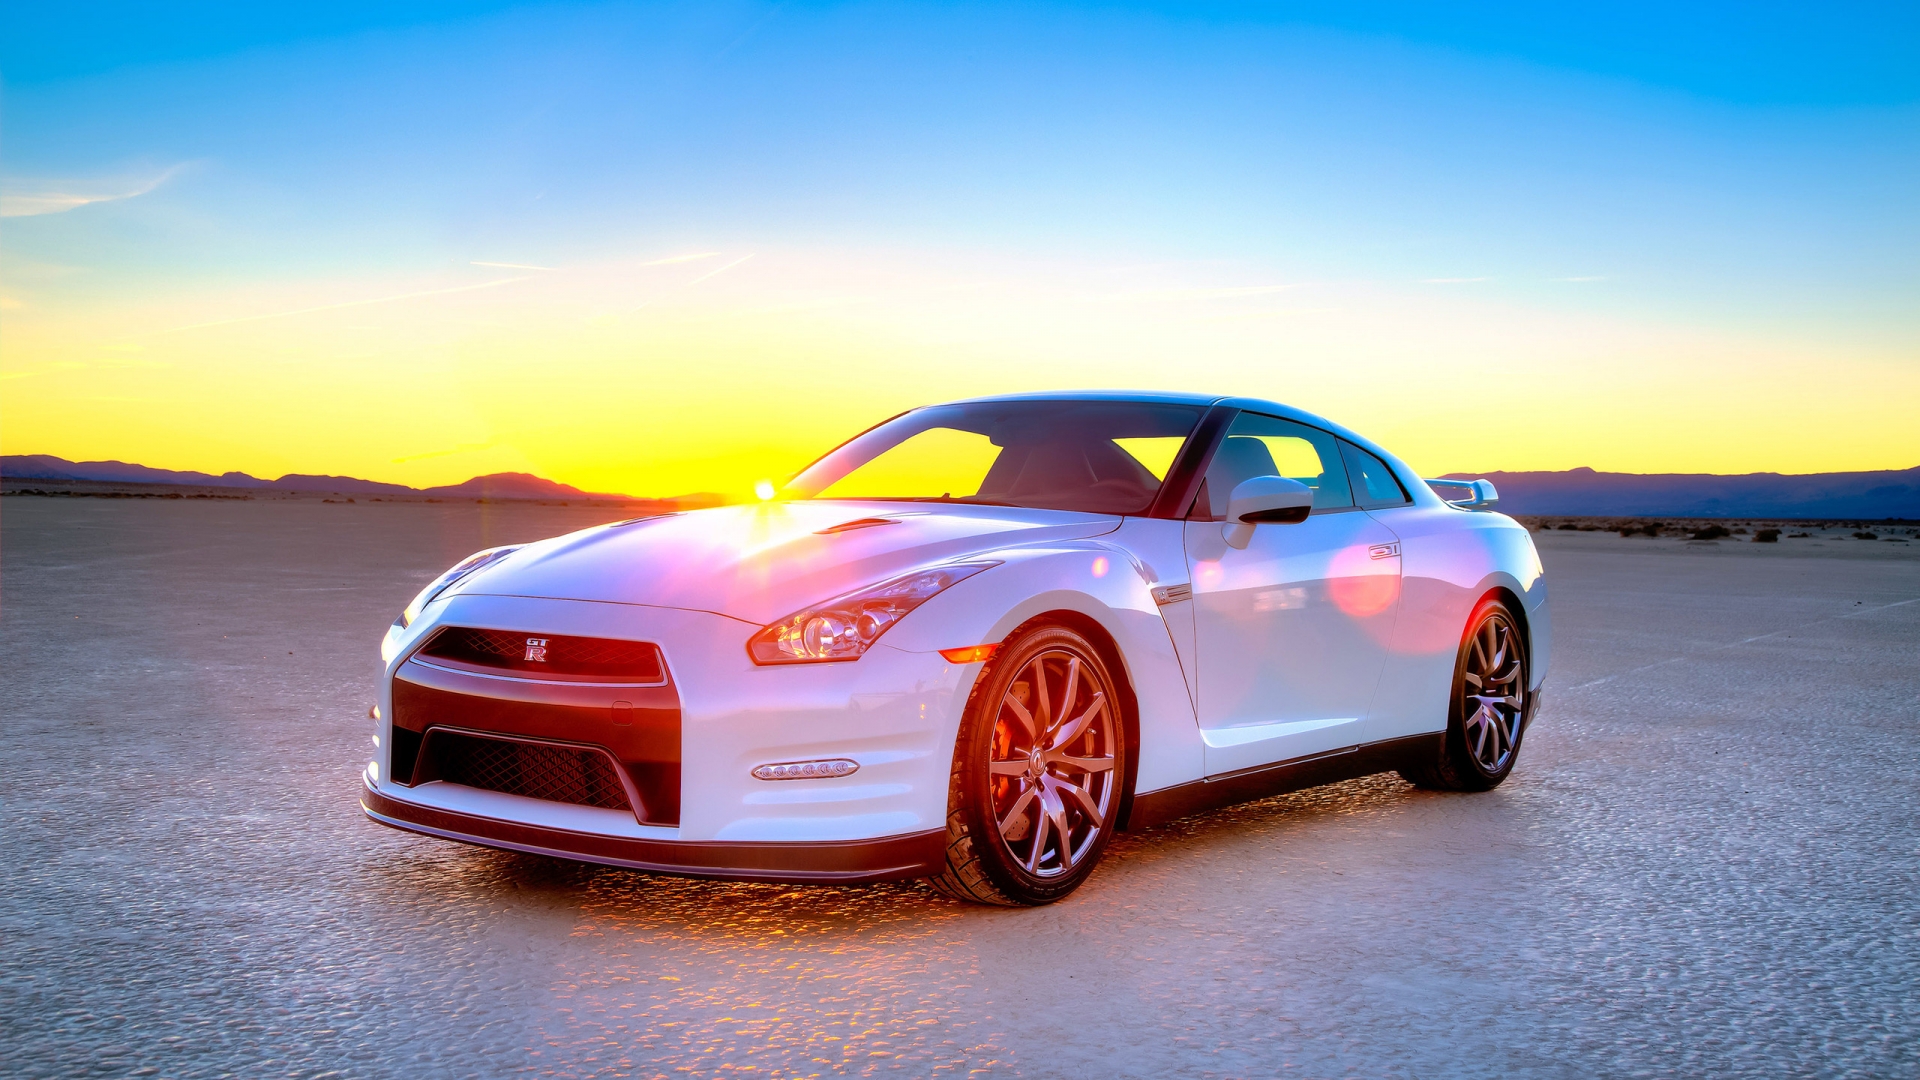 White Nissan GT-R 2014 Edition for 1920 x 1080 HDTV 1080p resolution